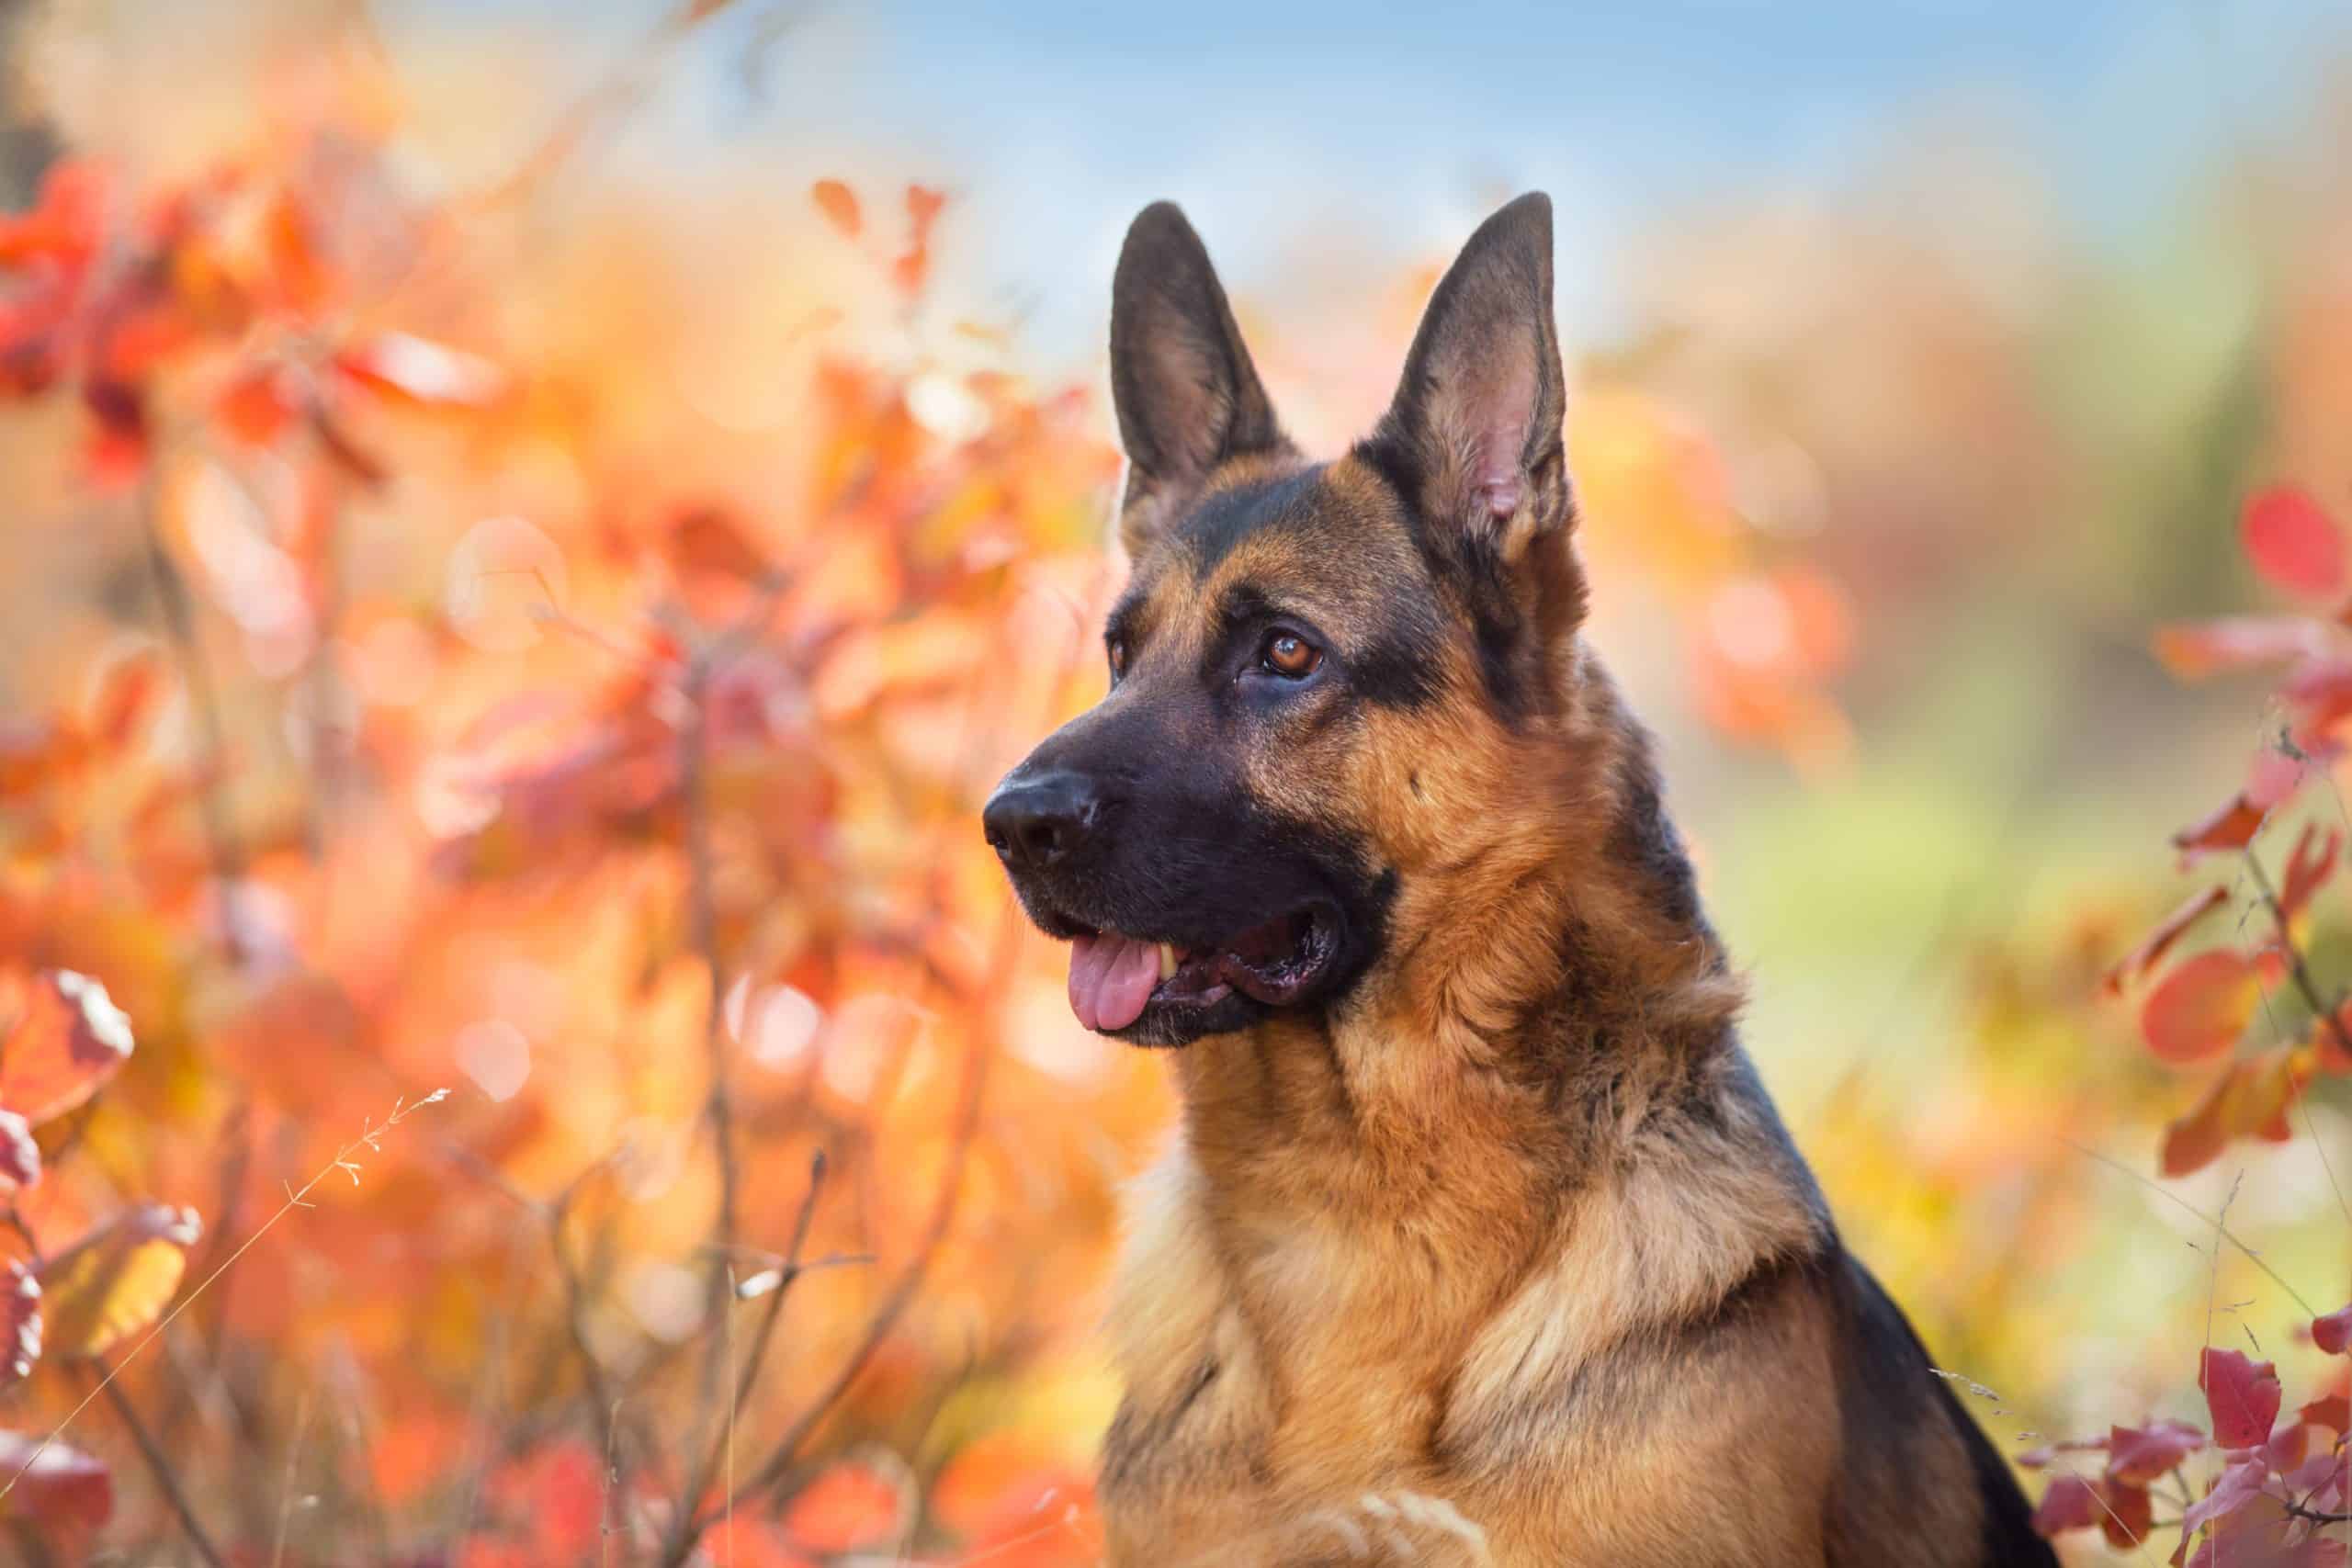 German shepherd sits outside. German shepherds are excellent at scaring away wild animals and are effective protectors.